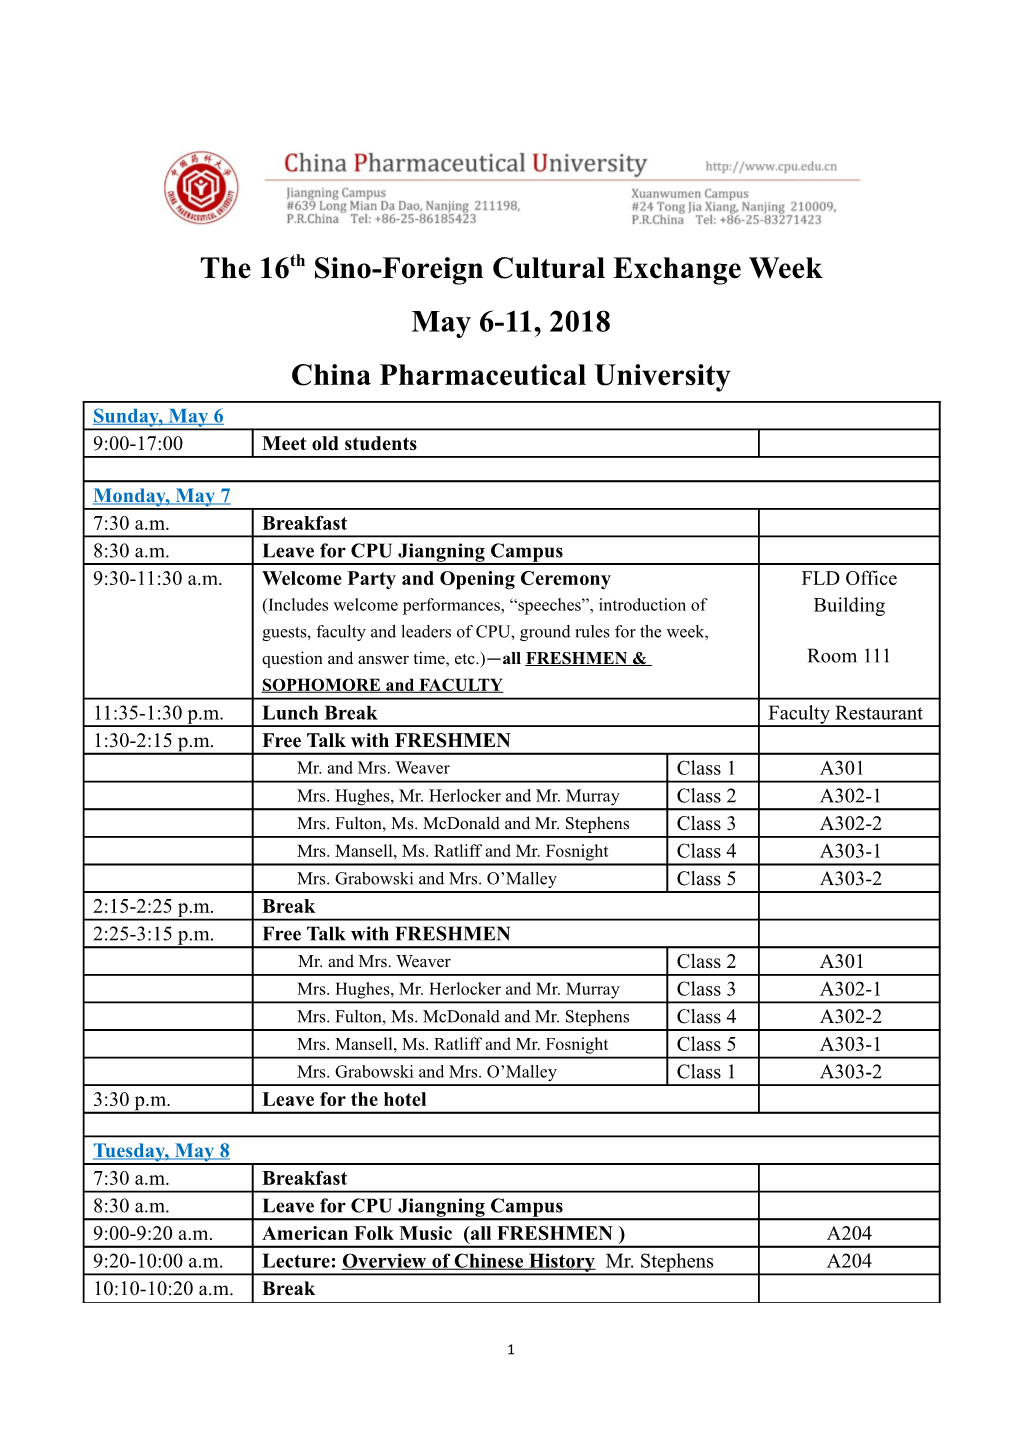 The 16Th Sino-Foreign Cultural Exchange Week